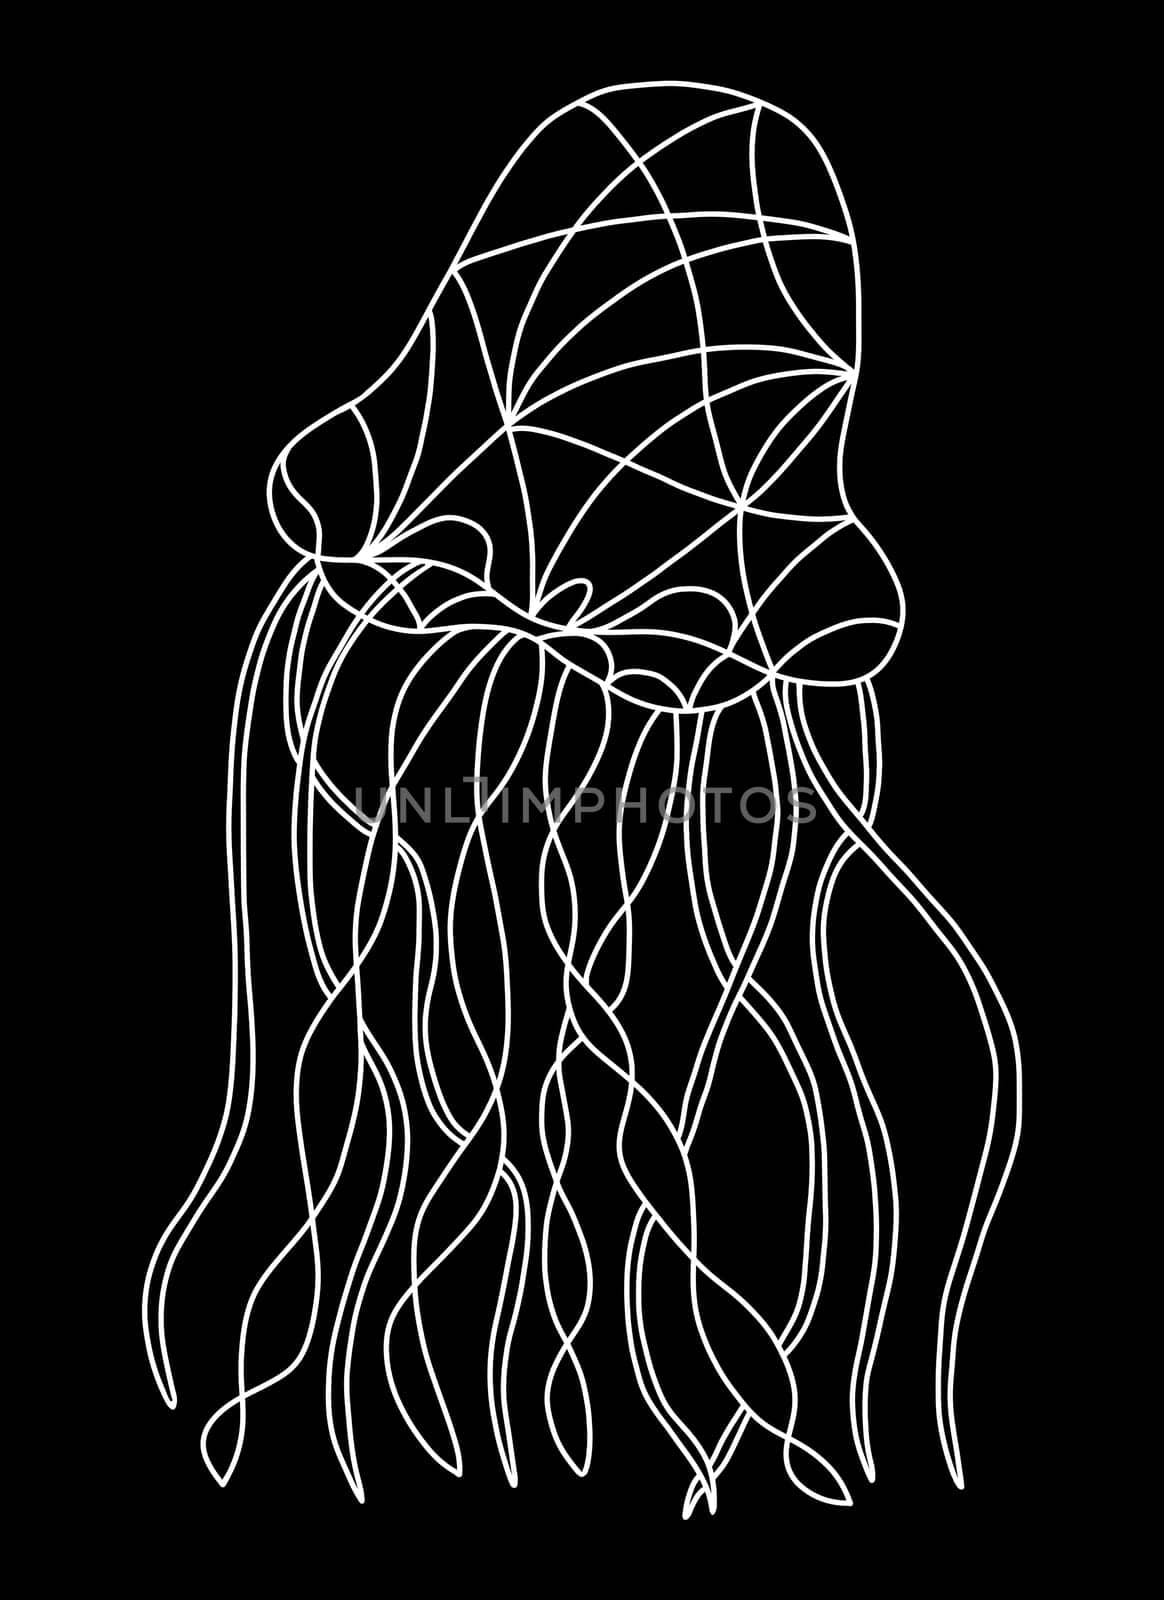 Outline Illustration of Jellyfish in Stained Glass Window Style. by Rina_Dozornaya